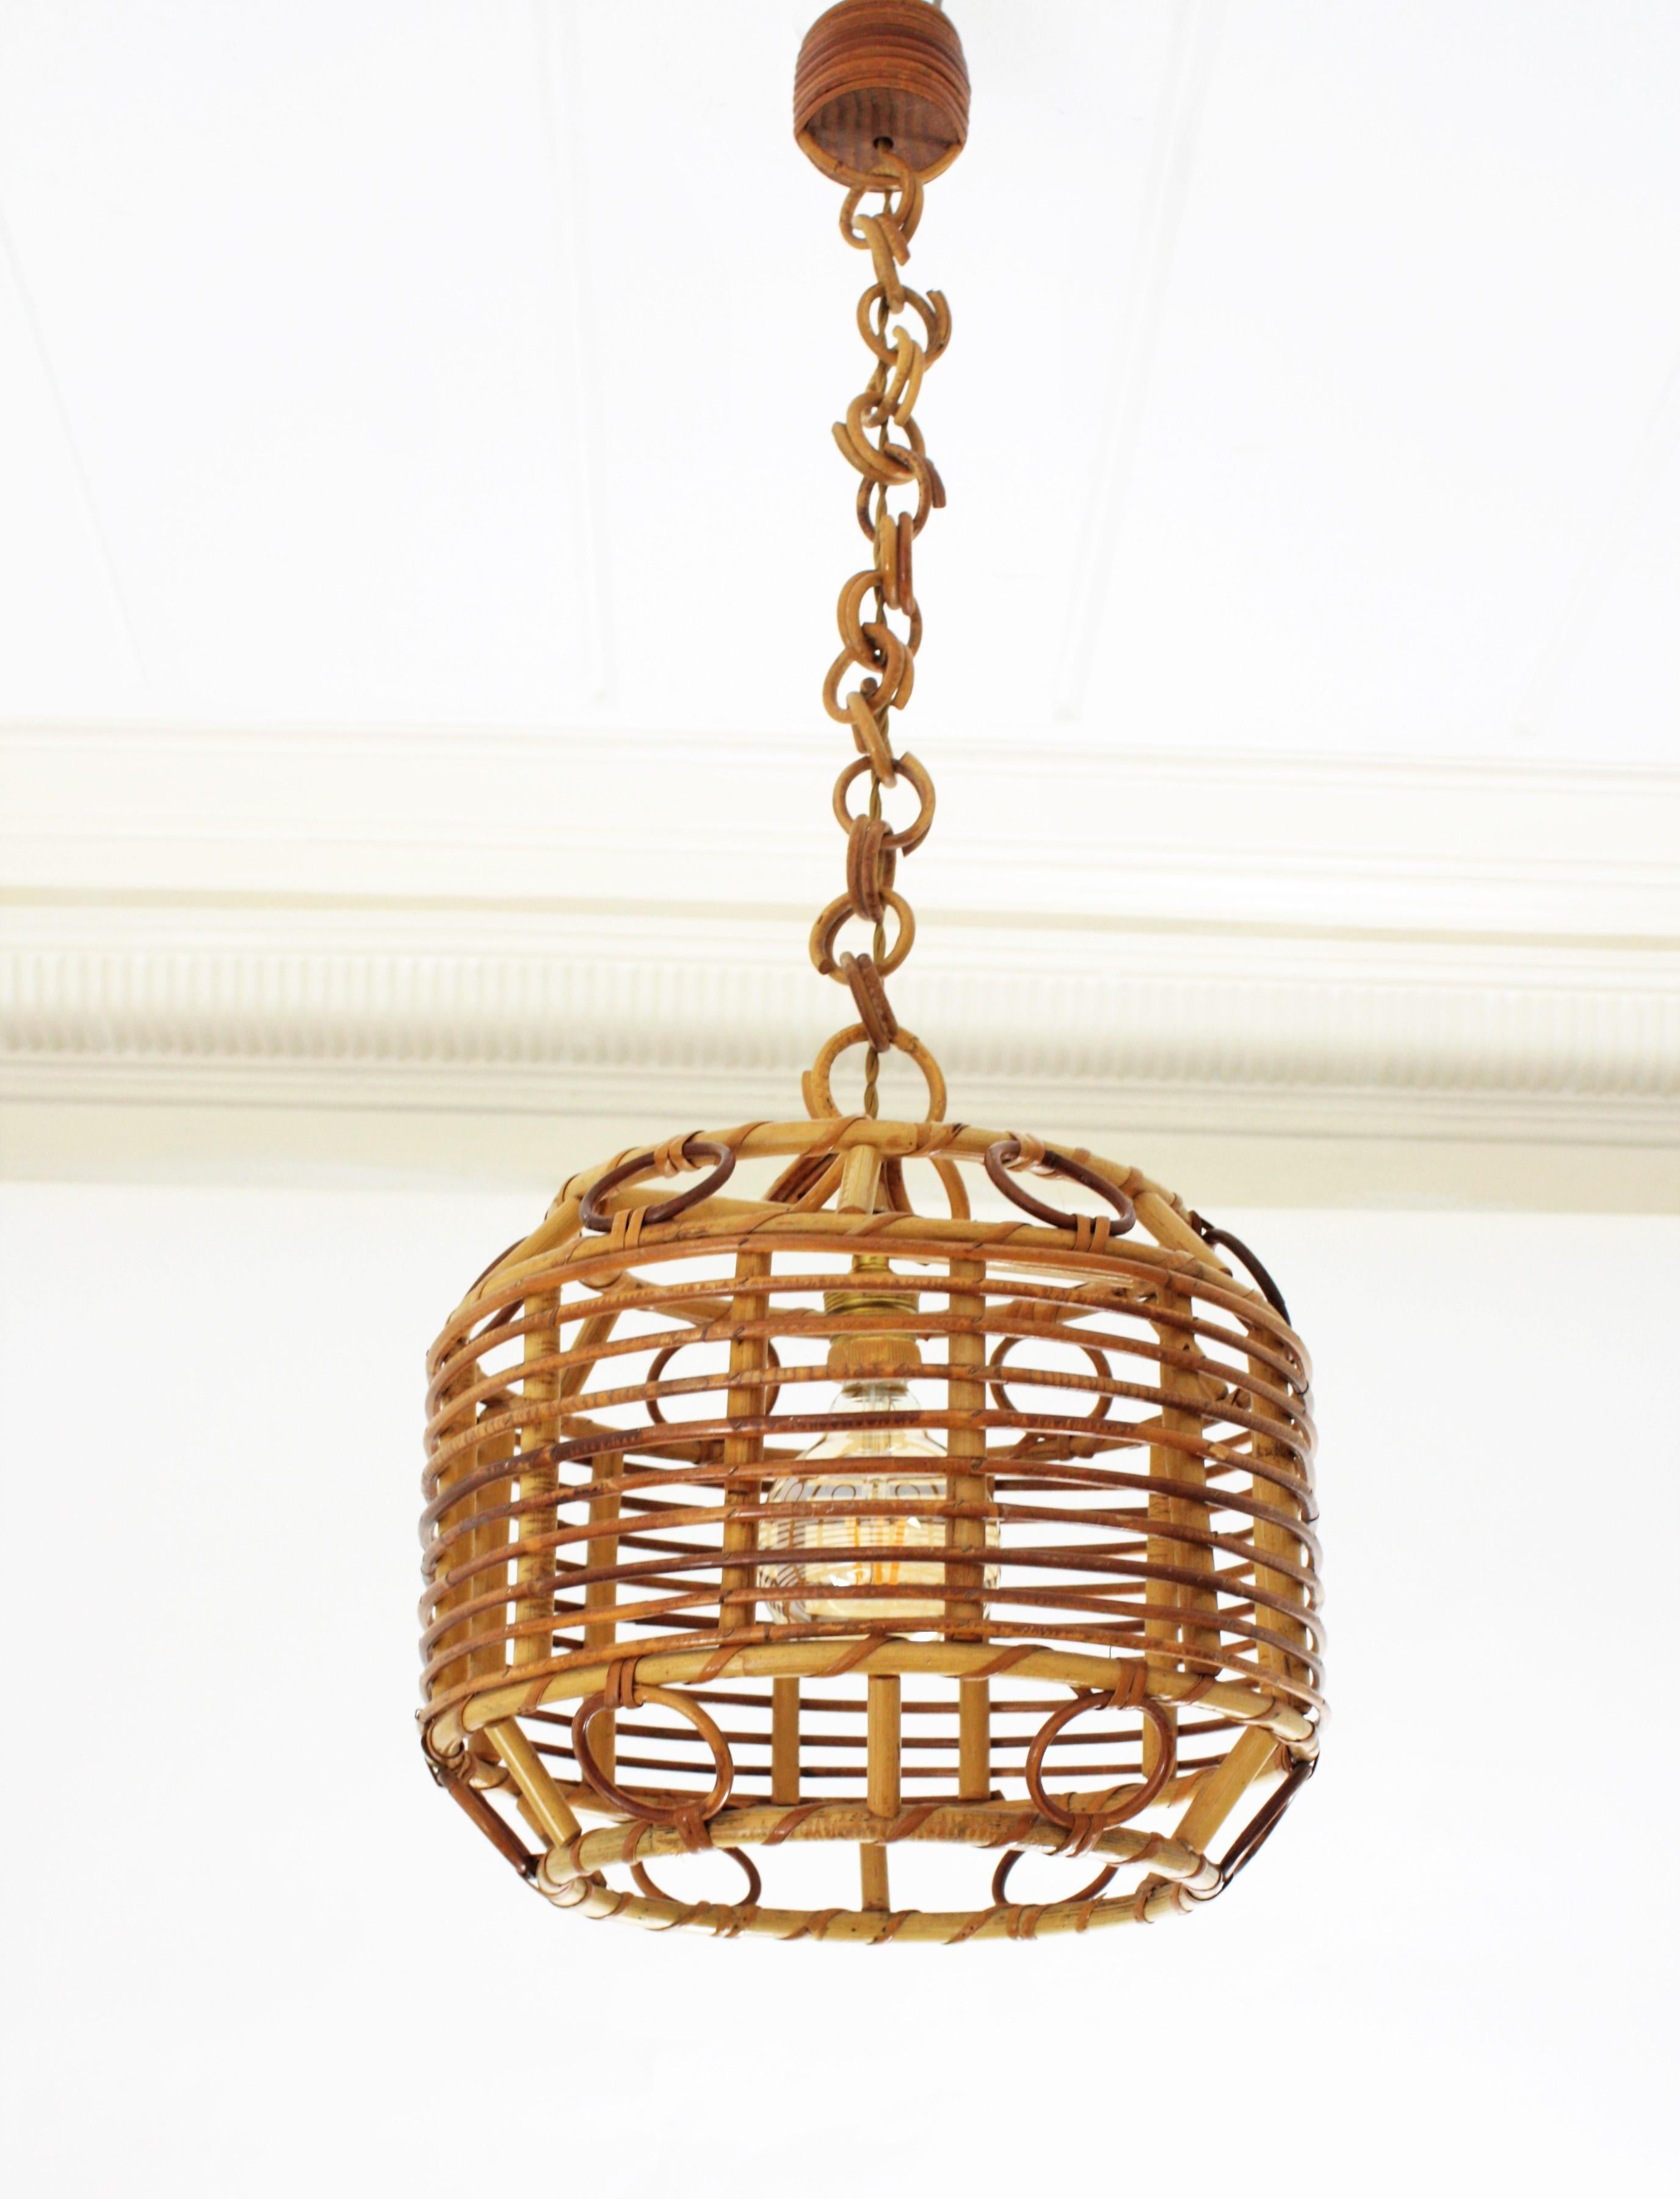 A beautiful handcrafted rattan, wicker and bamboo pendant light or lantern with geometric decorations, Spain, 1960s.
 It hangs from a wicker chain that can be modified to make it shorter. This lamp could add a fresh Mediterranean taste over a